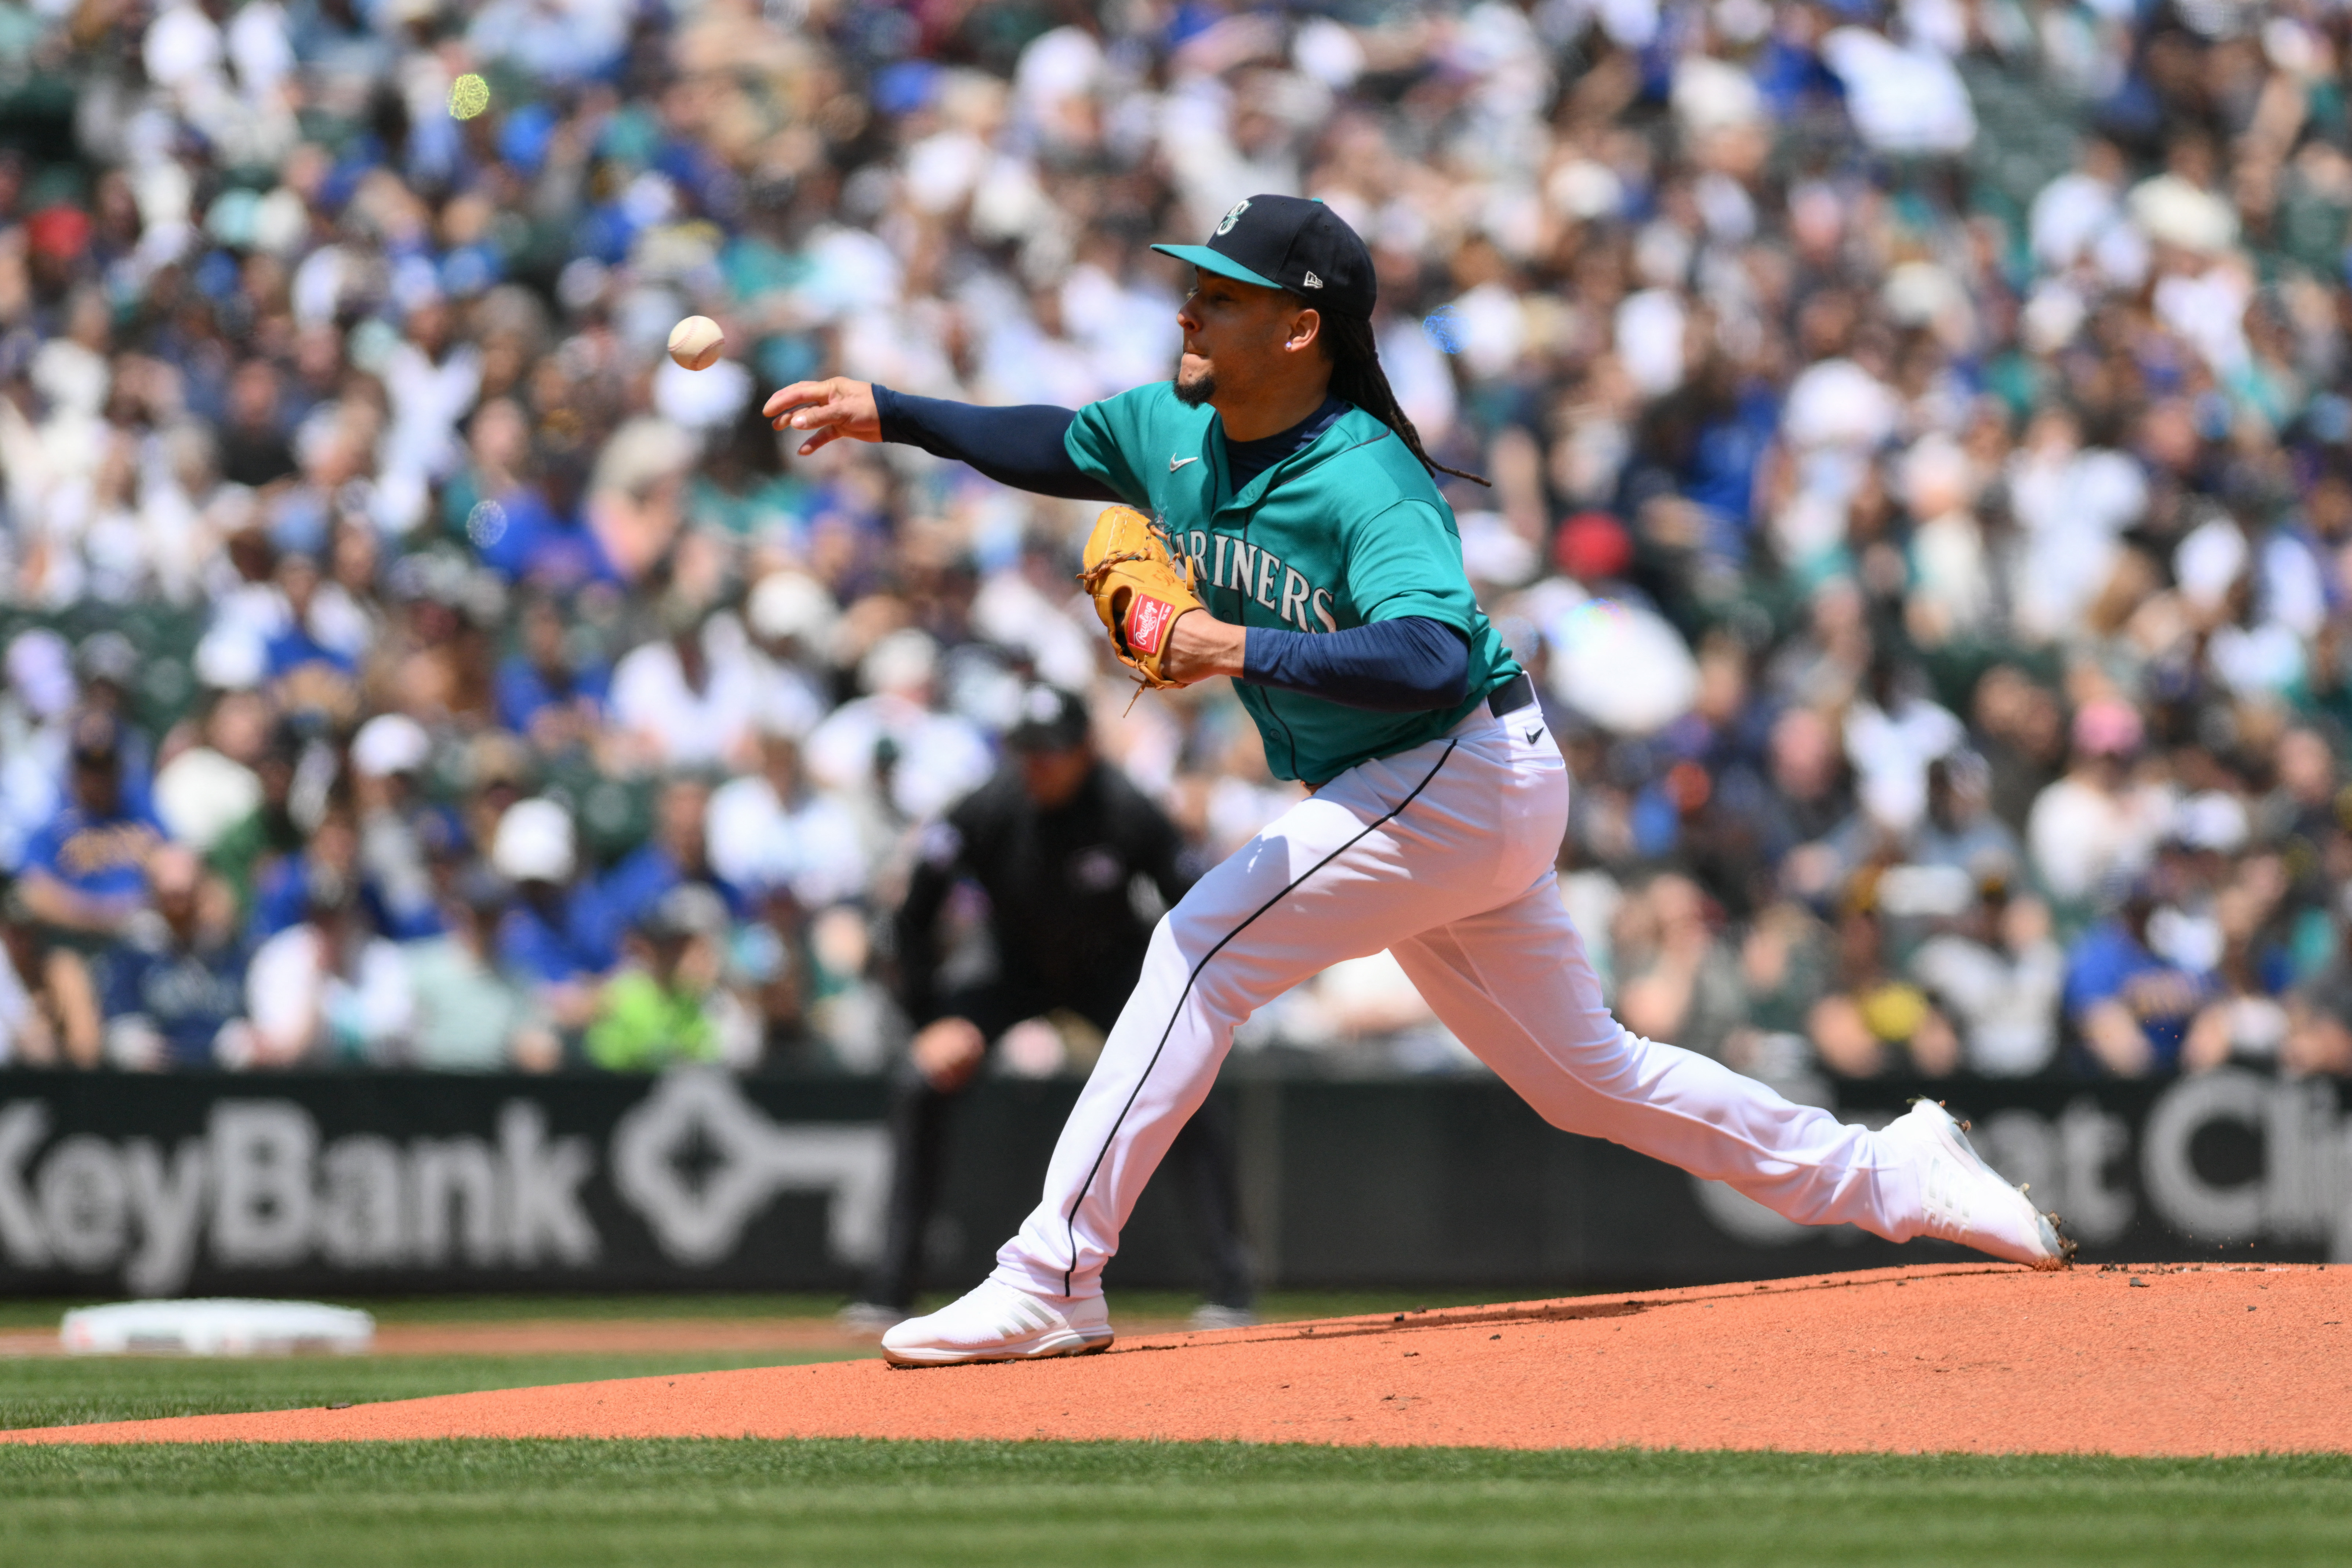 Luis Castillo strikes out 10 as Mariners beat Pirates 5-0